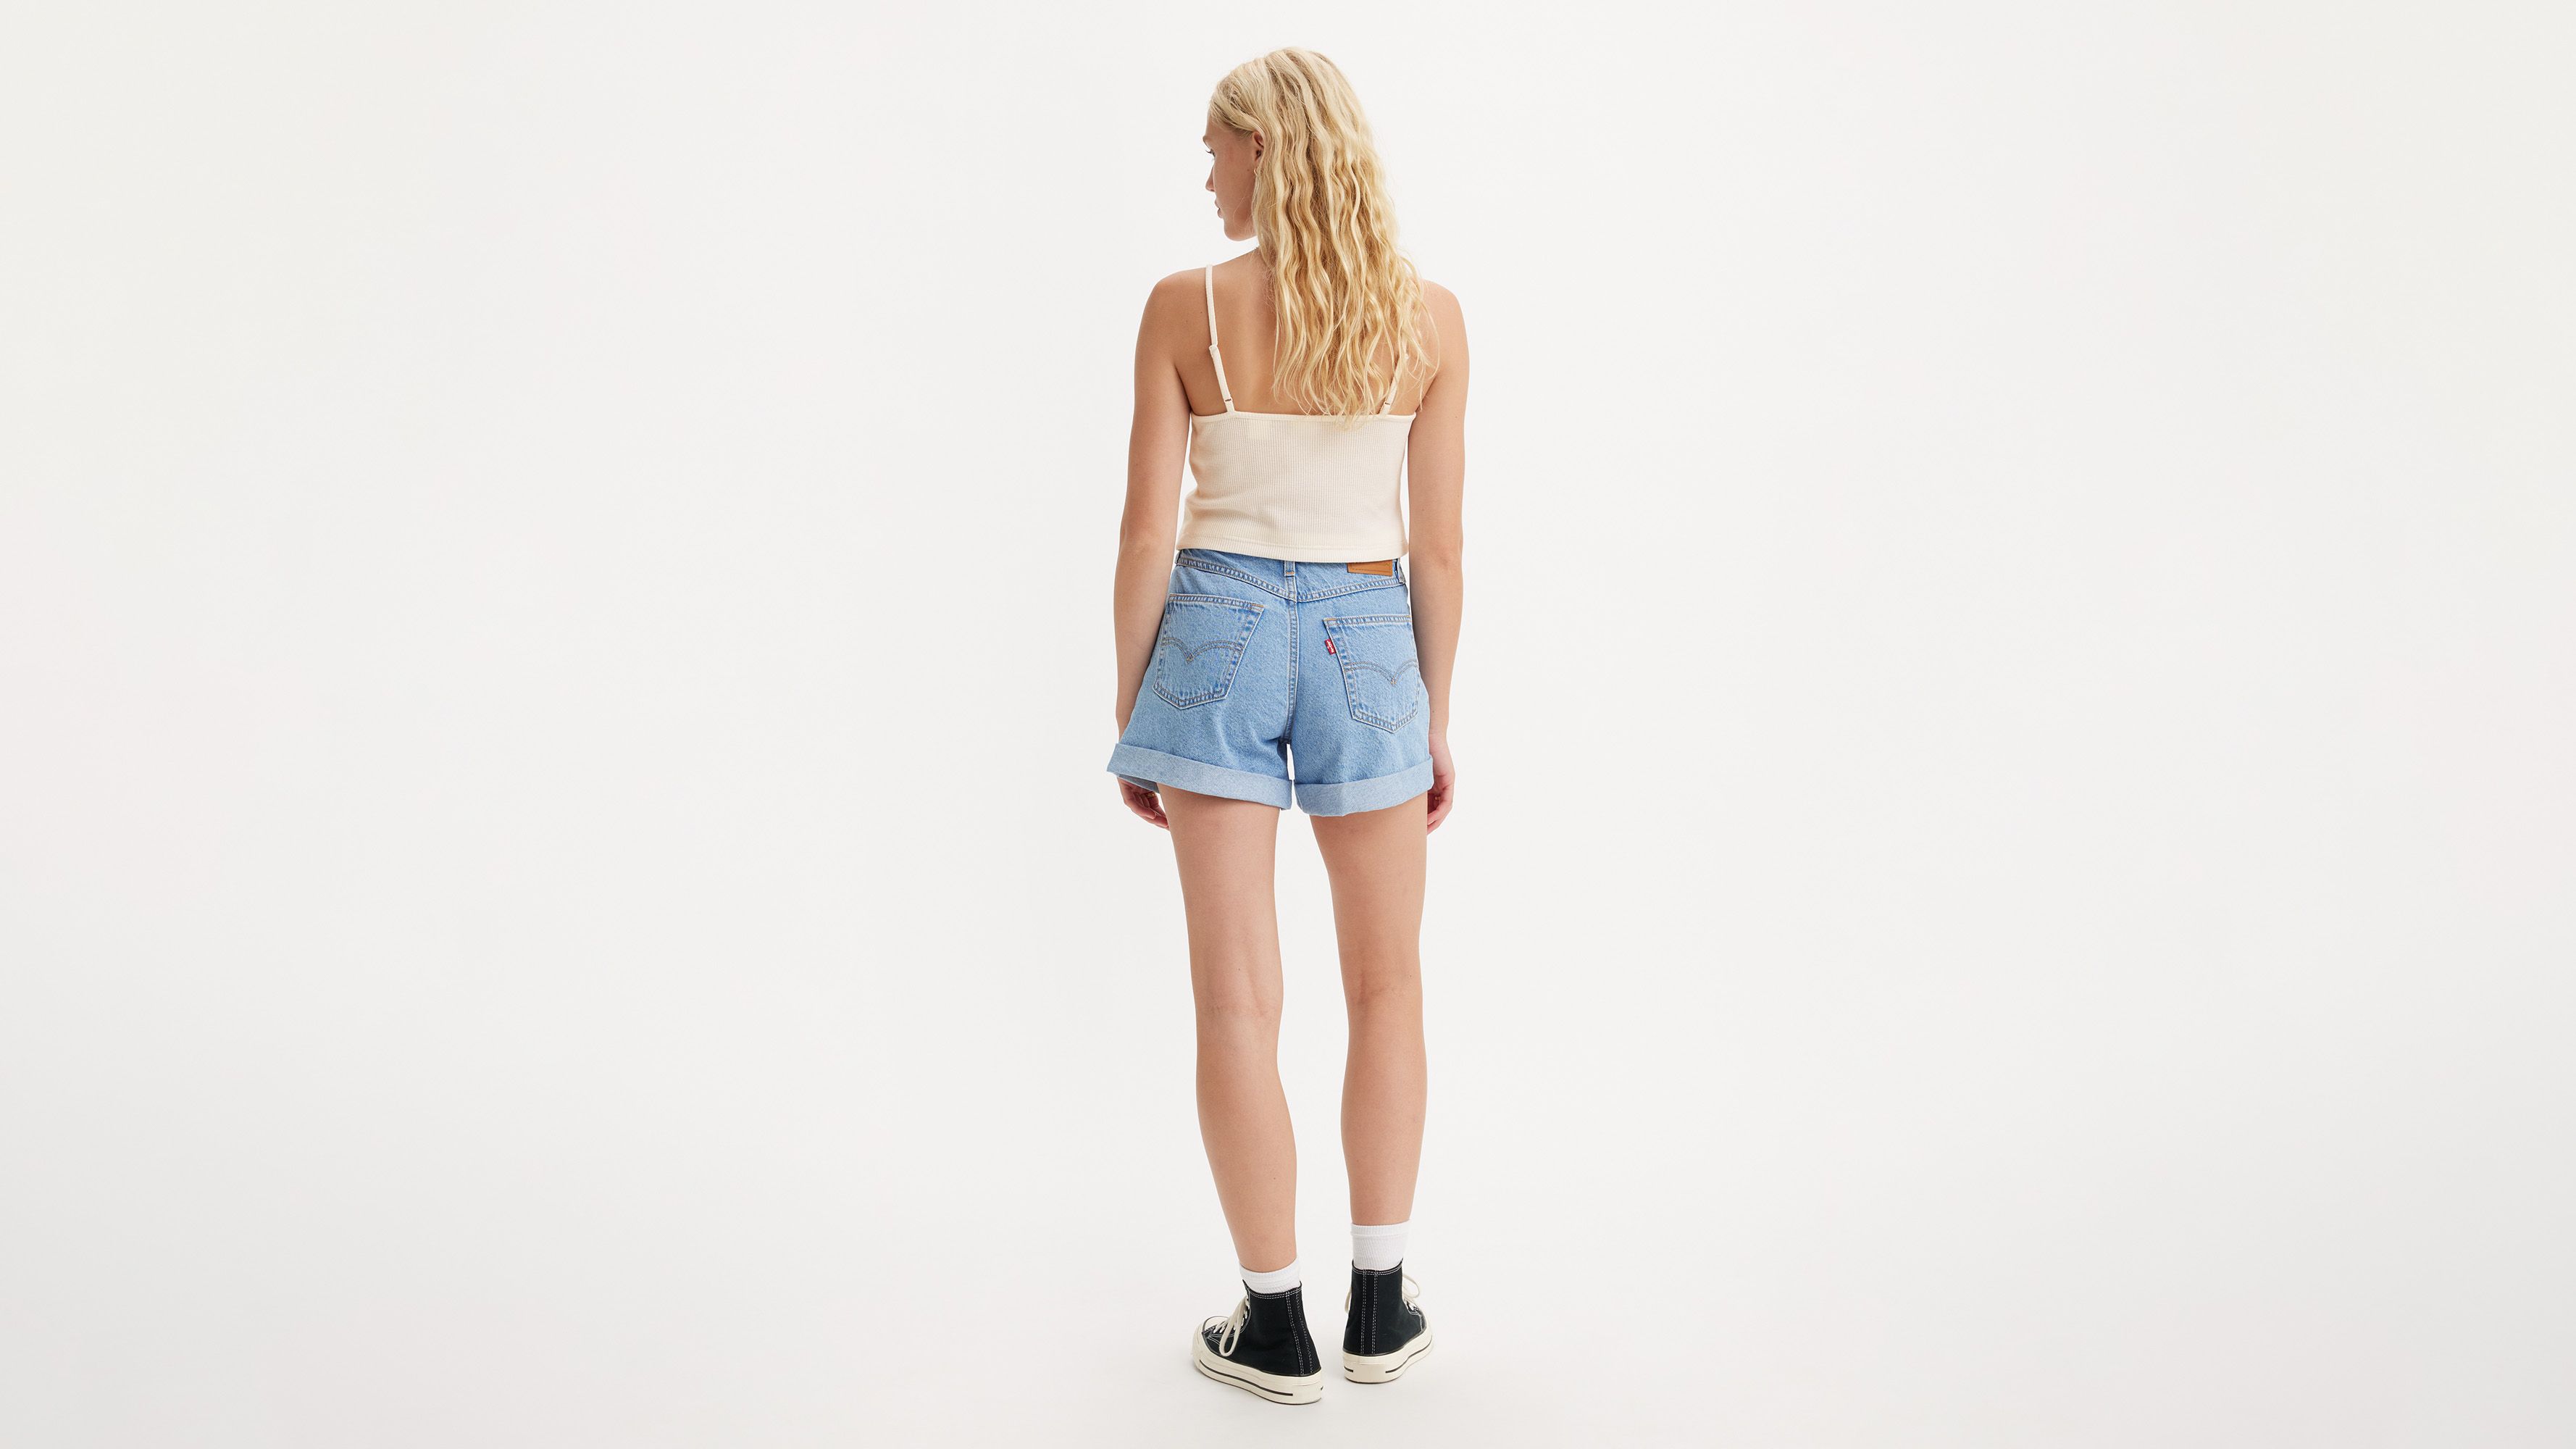 Women's Short Pants: 11000+ Items up to −80%